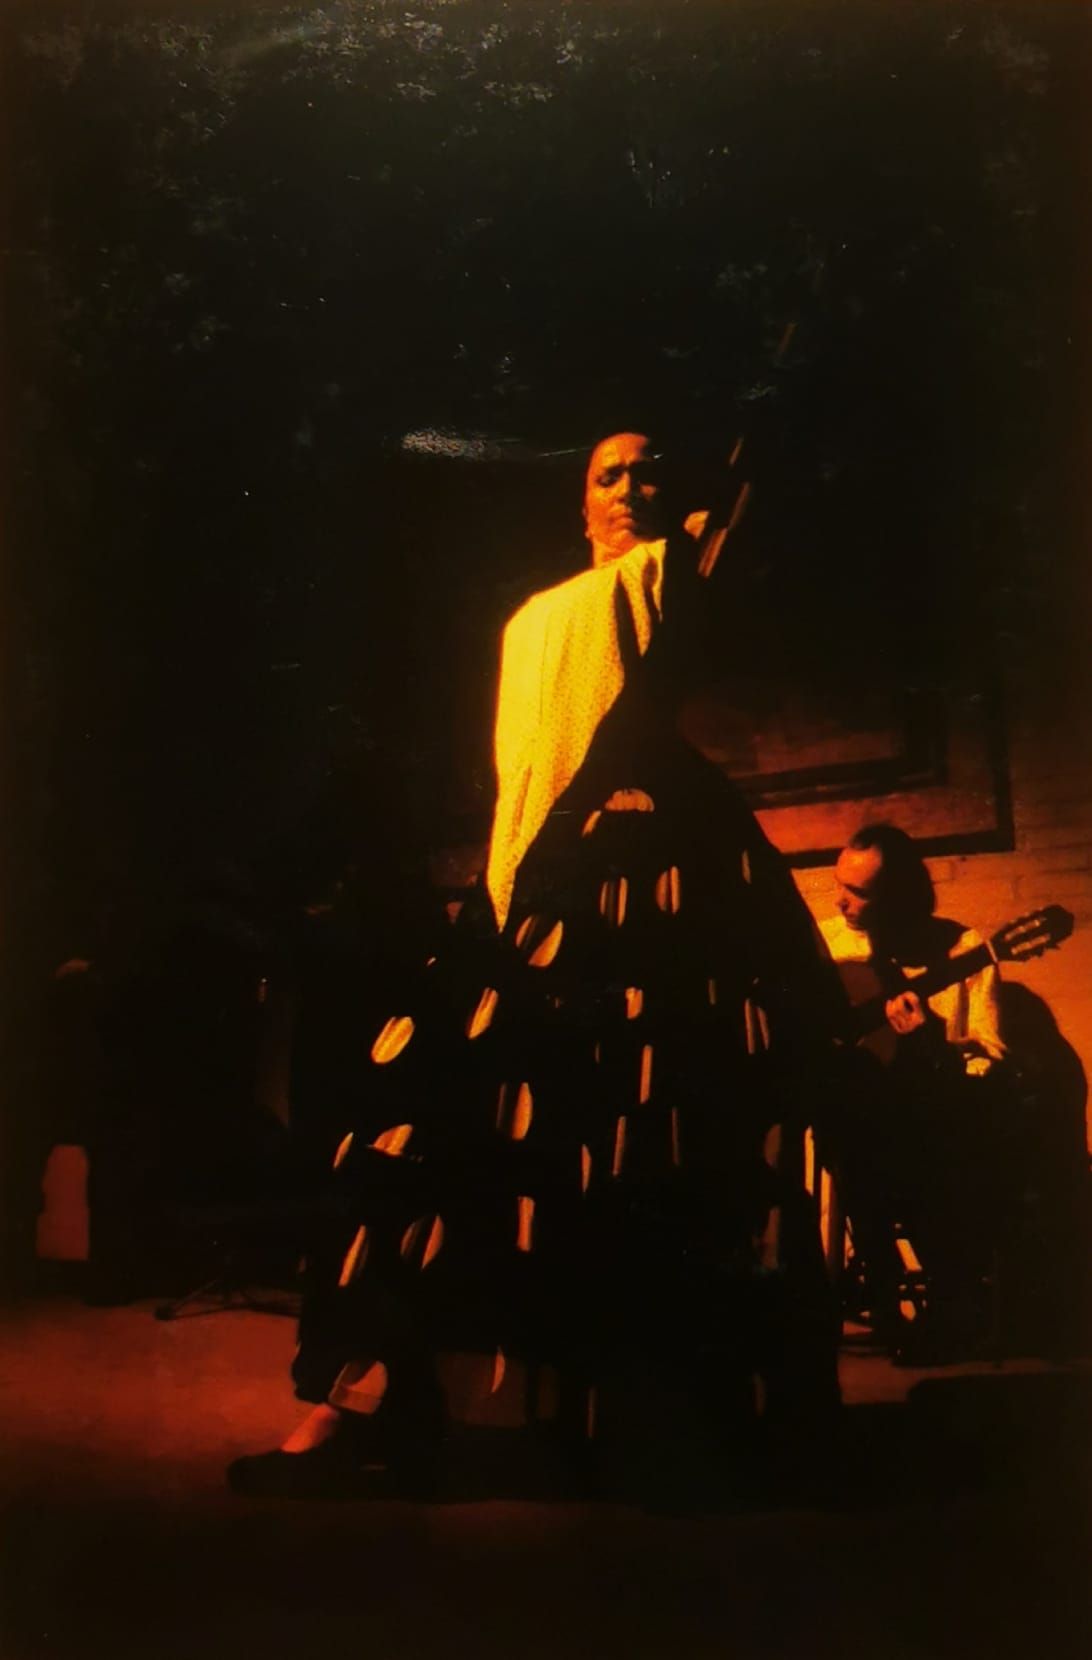 The soleá is one of the most emblematic dances of flamenco.